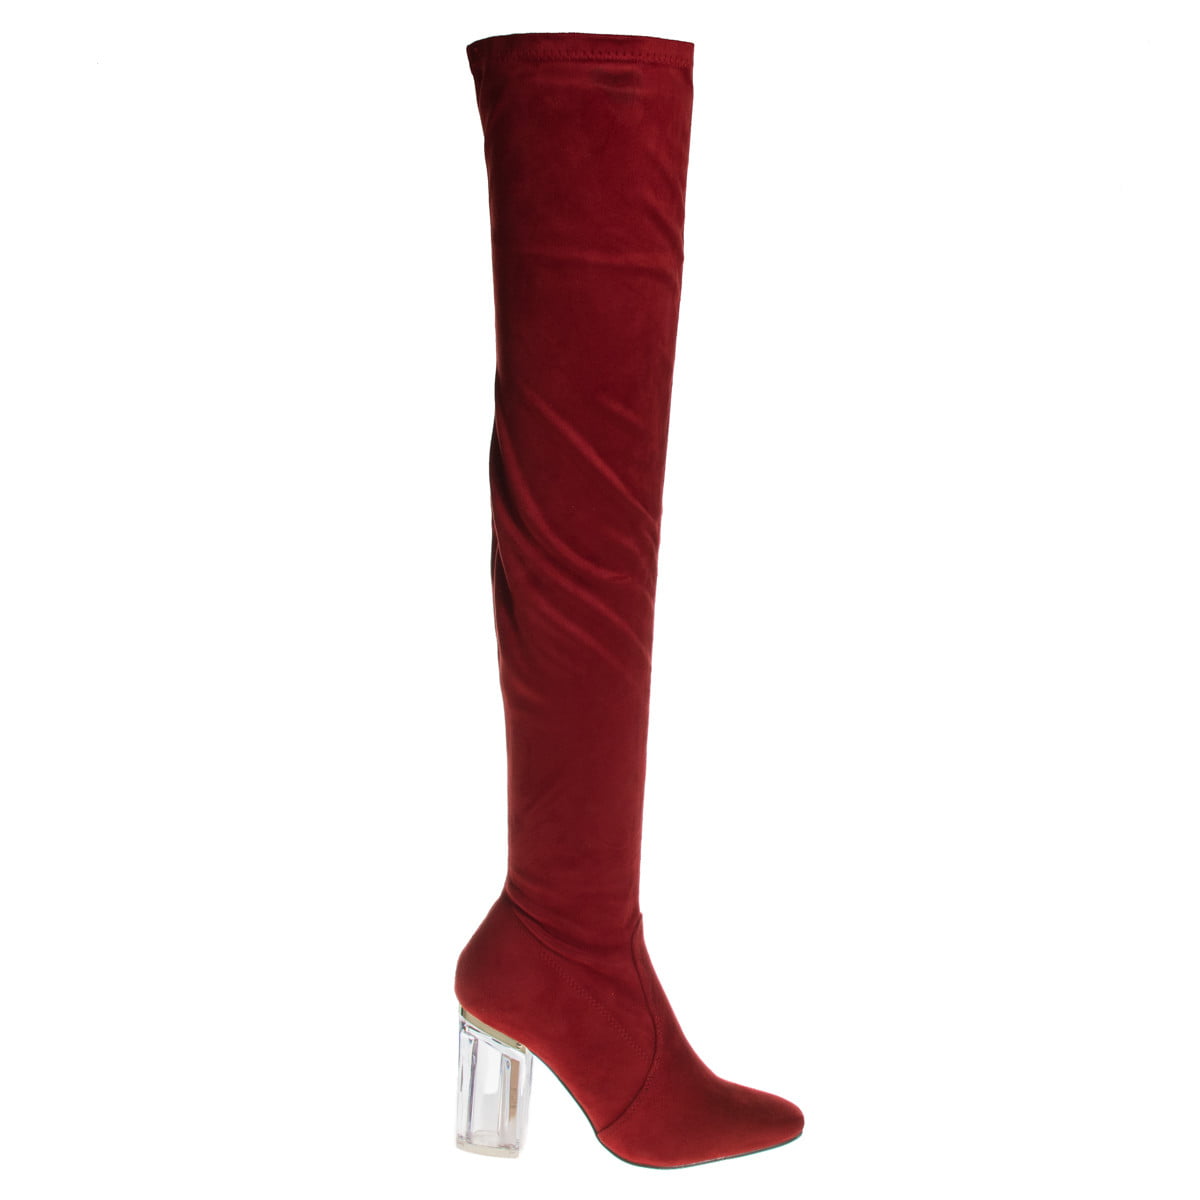 perspex thigh high boots